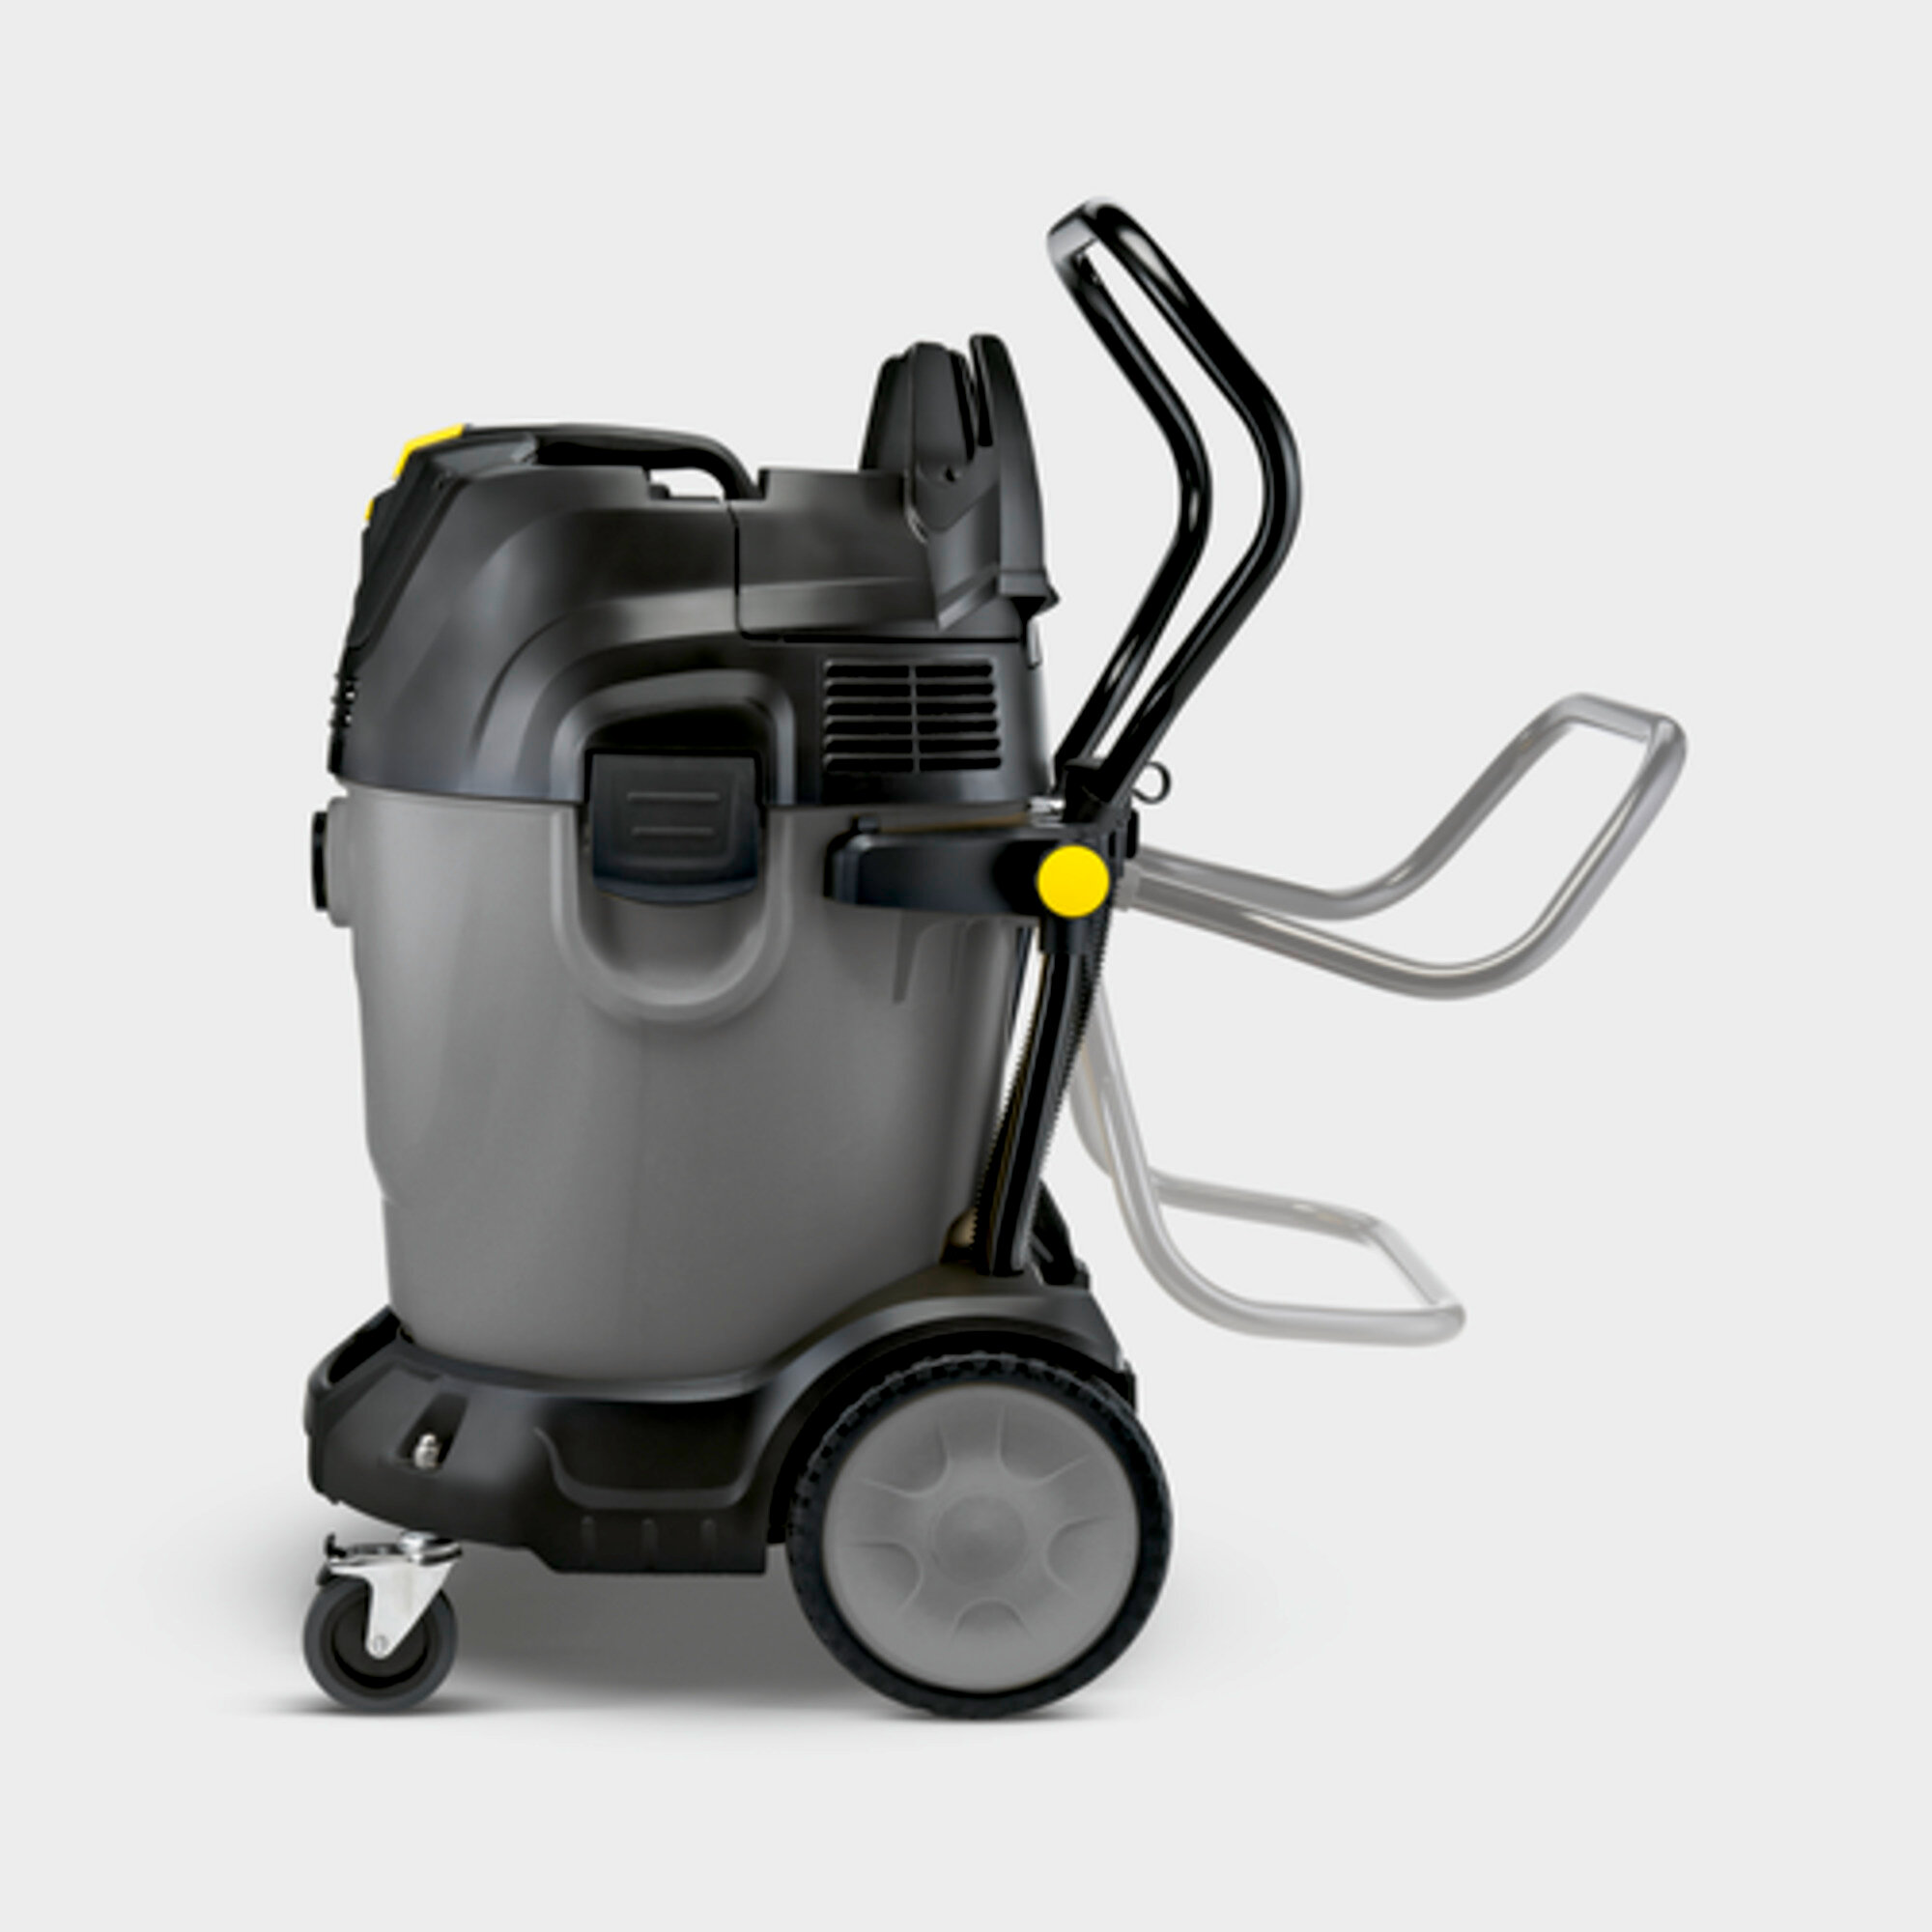 Wet and dry vacuum cleaner NT 65/2 Tact² 15 Amp: Easy to transport